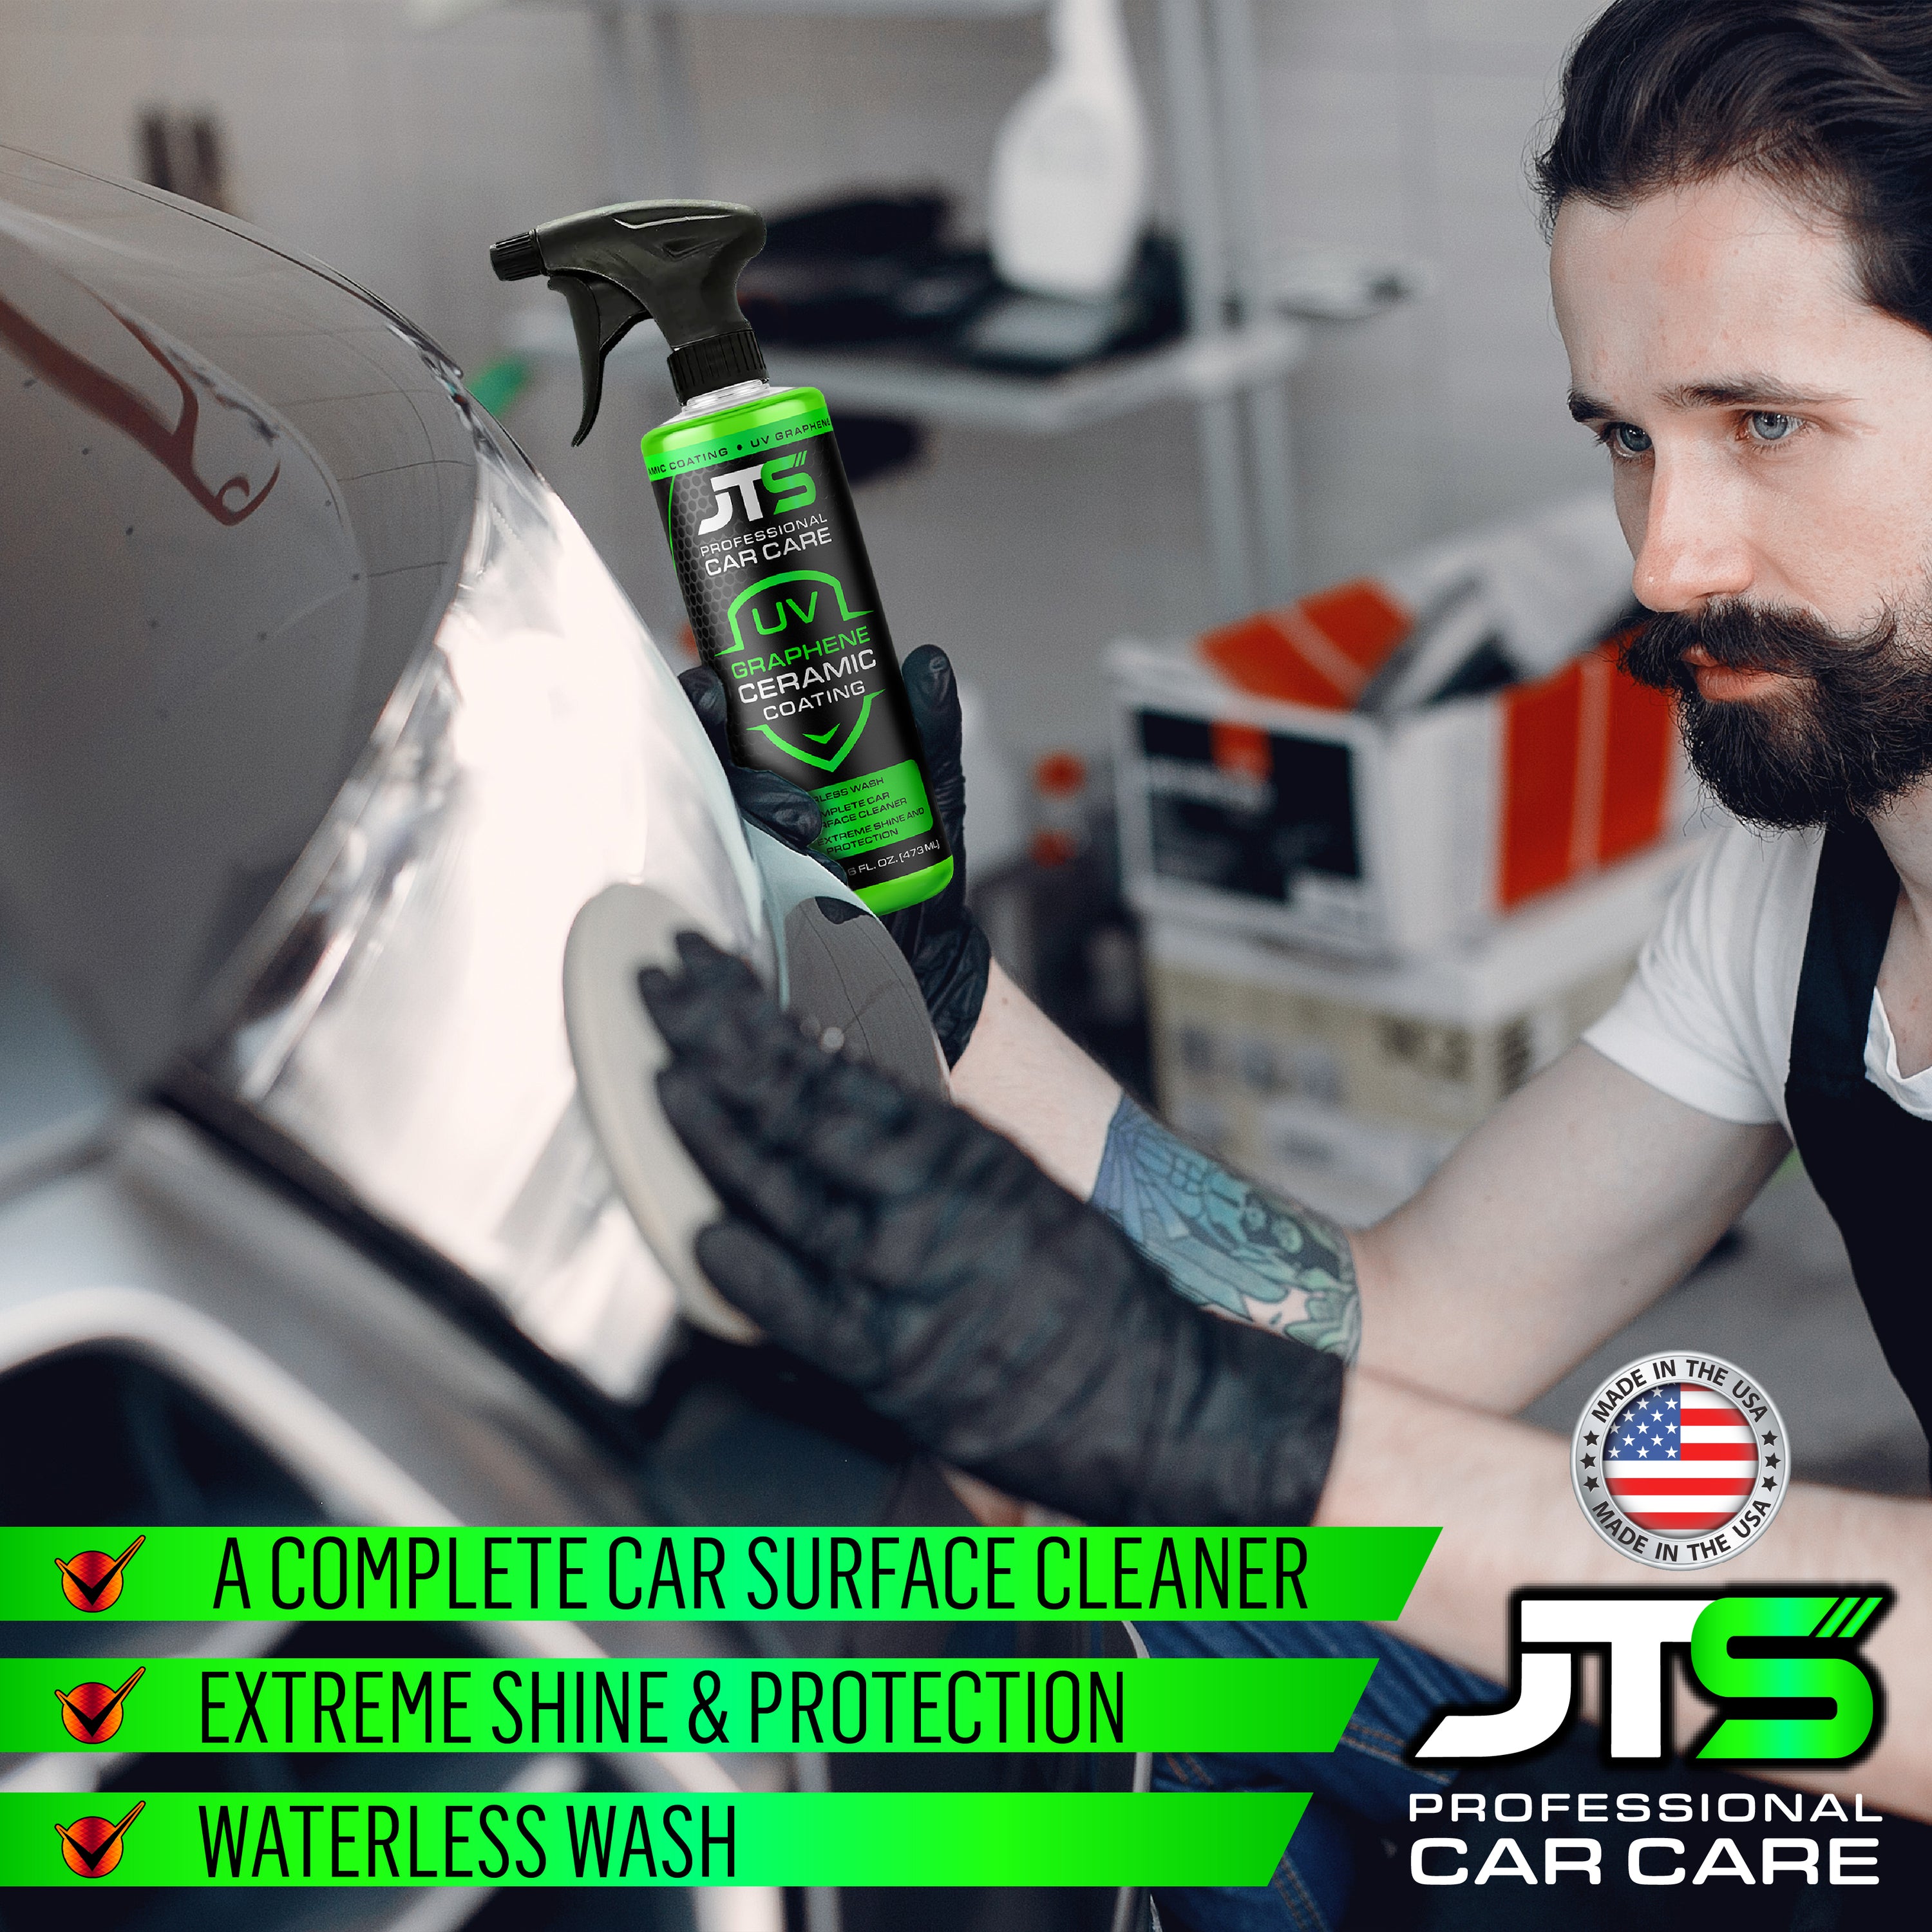 JT Mobile Detailing collab with @Legendary Car Care out now! link